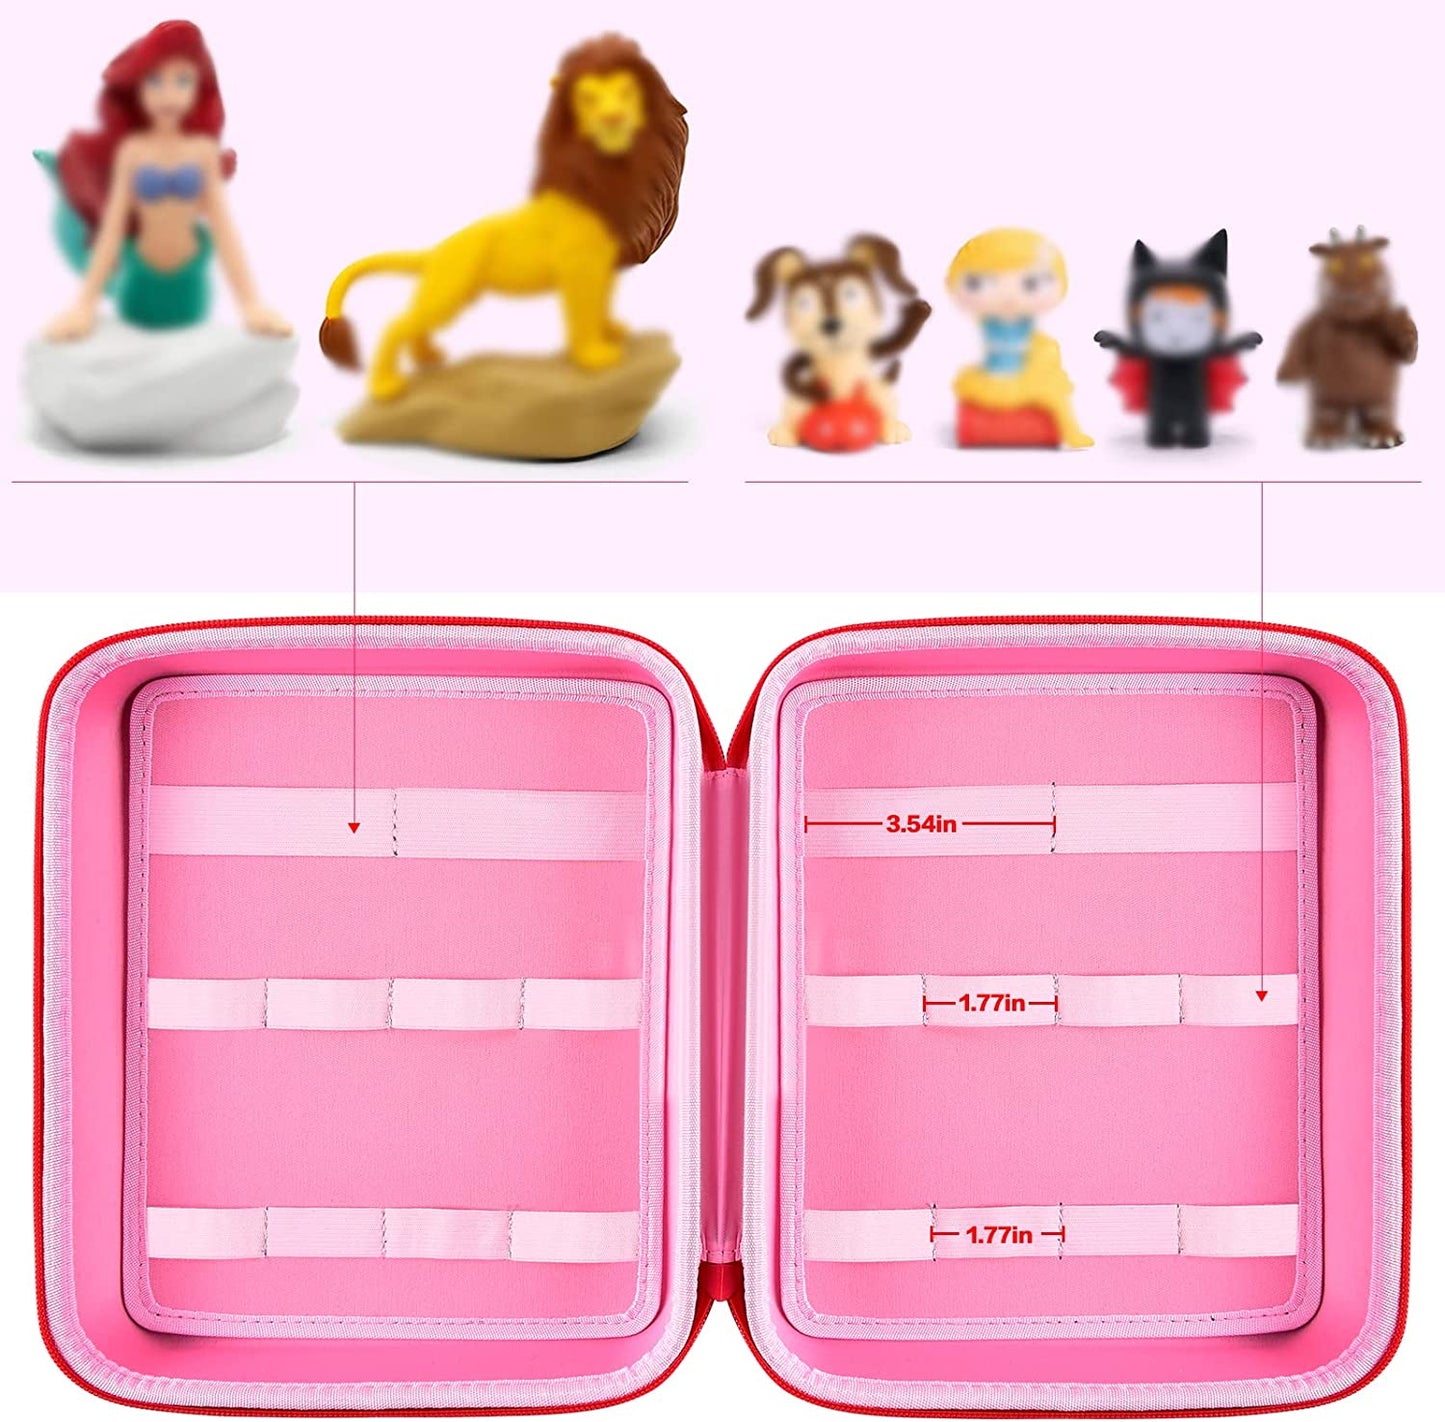 Case Compatible with Tonies Figures Audio Play Character, Figurine Storage Holder for TonieBox Characters for Kids, Toy Organizer Box for Peppa Pig/for Playtime Puppy/for Nemo/for Simba(Bag Only) Red